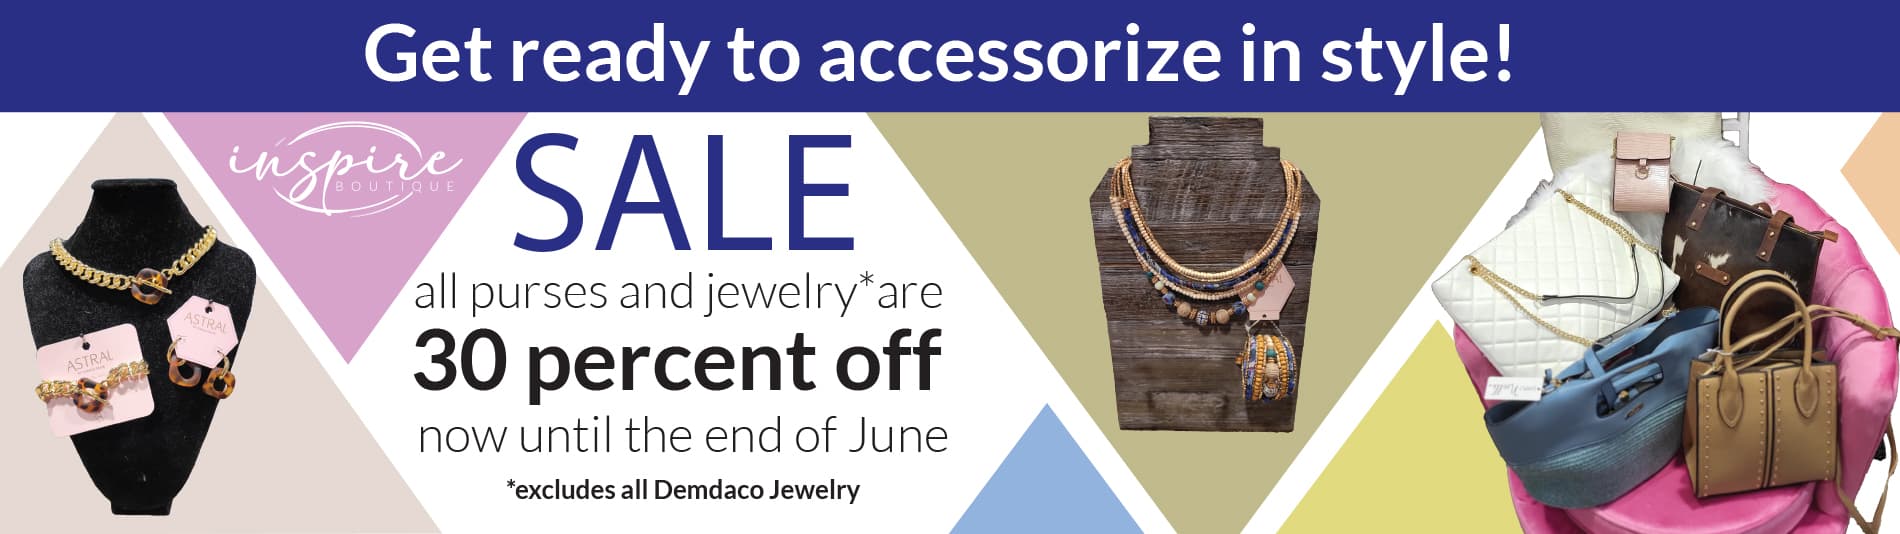 Inspire Boutique Spring Purse and Jewelry Sale - all purses and jewelry 30% off now through the end of June